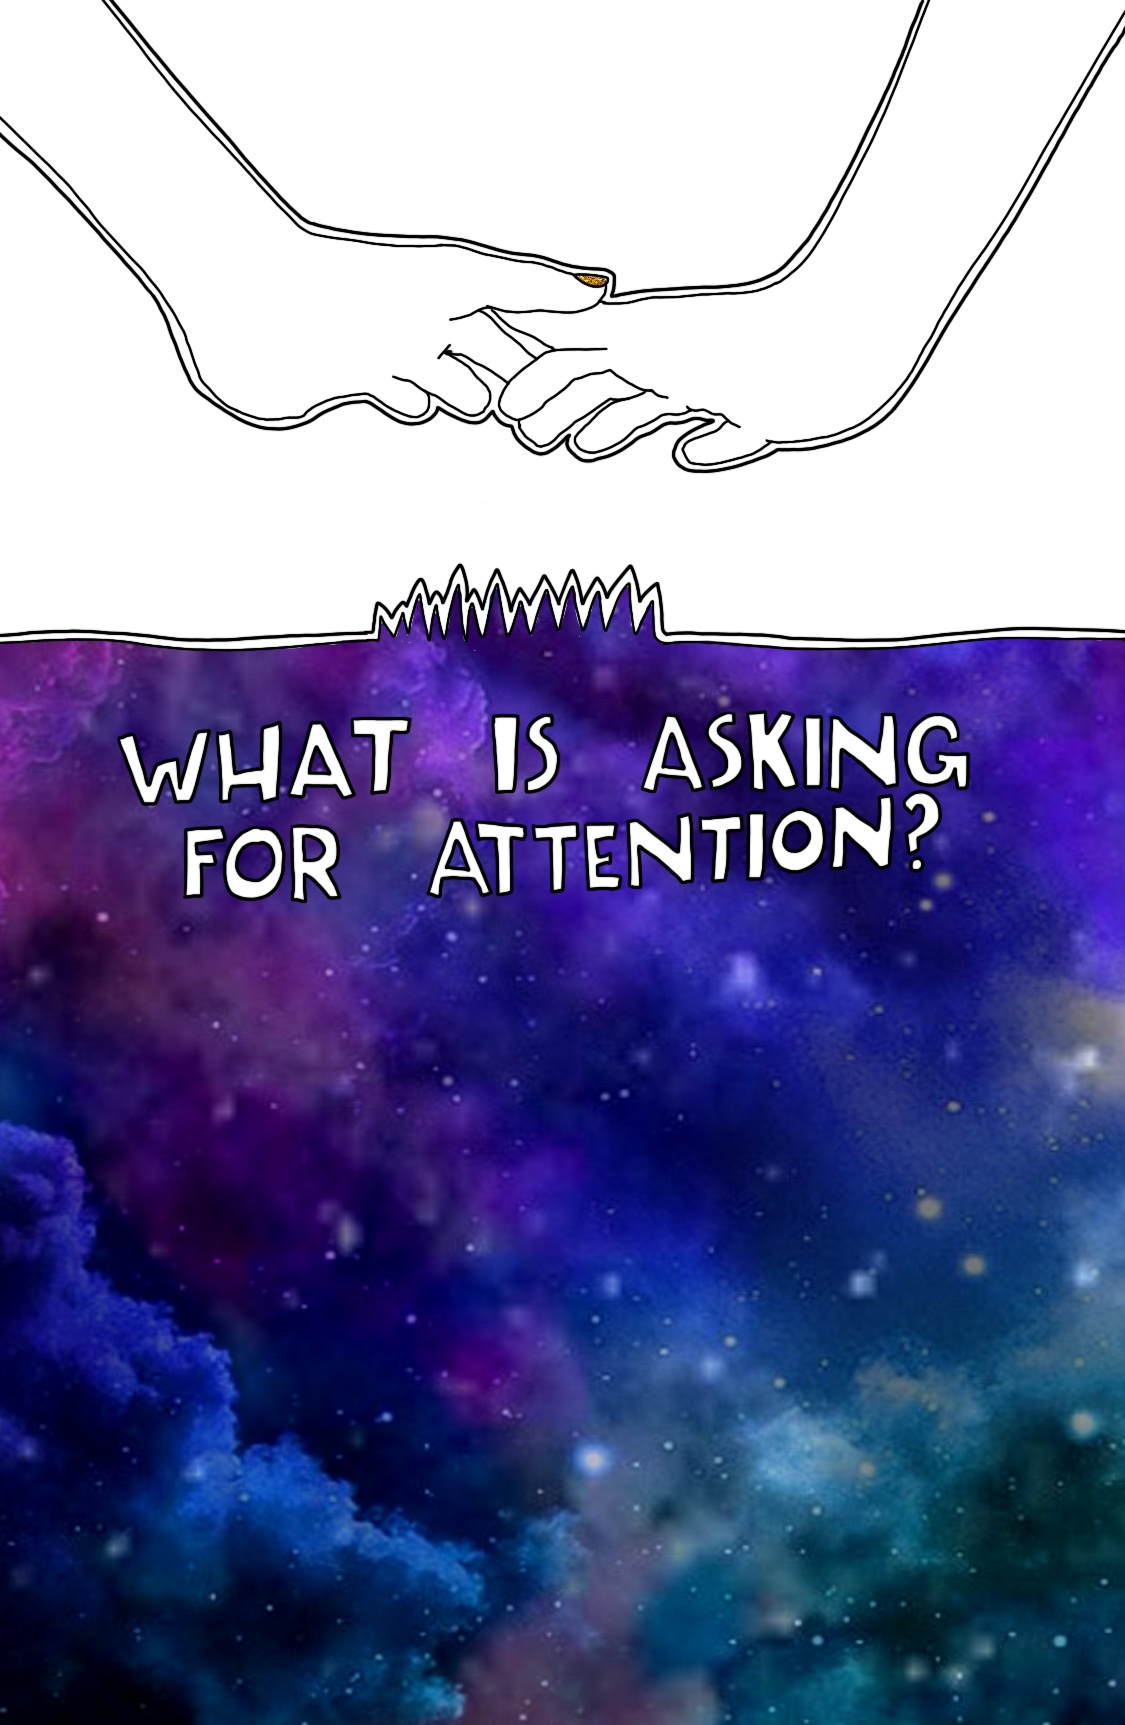 Journal Prompt: What is asking for attention?